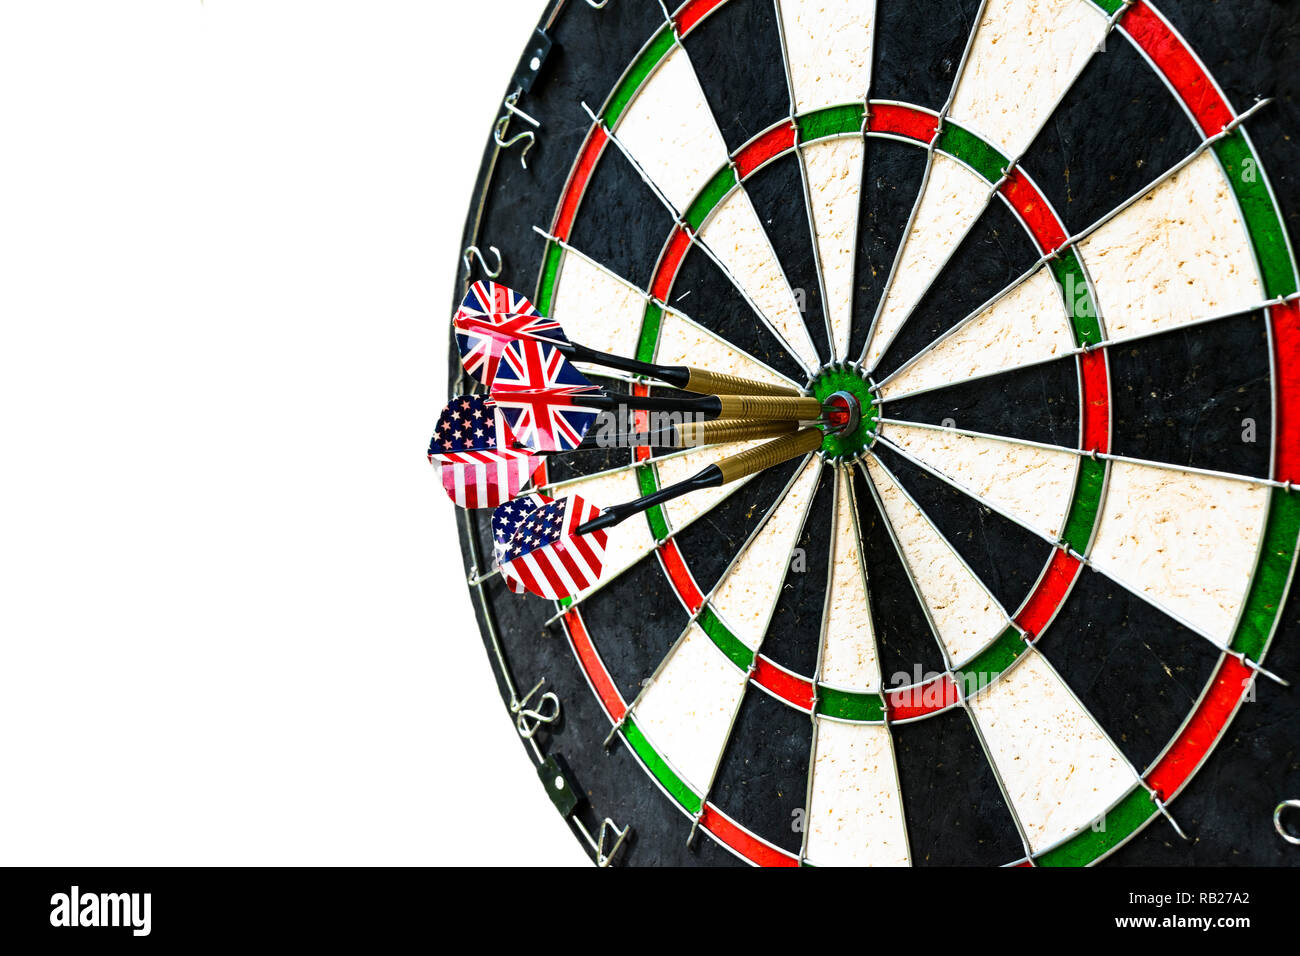 Metal darts have hit the red bullseye on a dart board. Darts Game. Darts arrow in the target center darts in bull's eye close up isolatedon white back Stock Photo